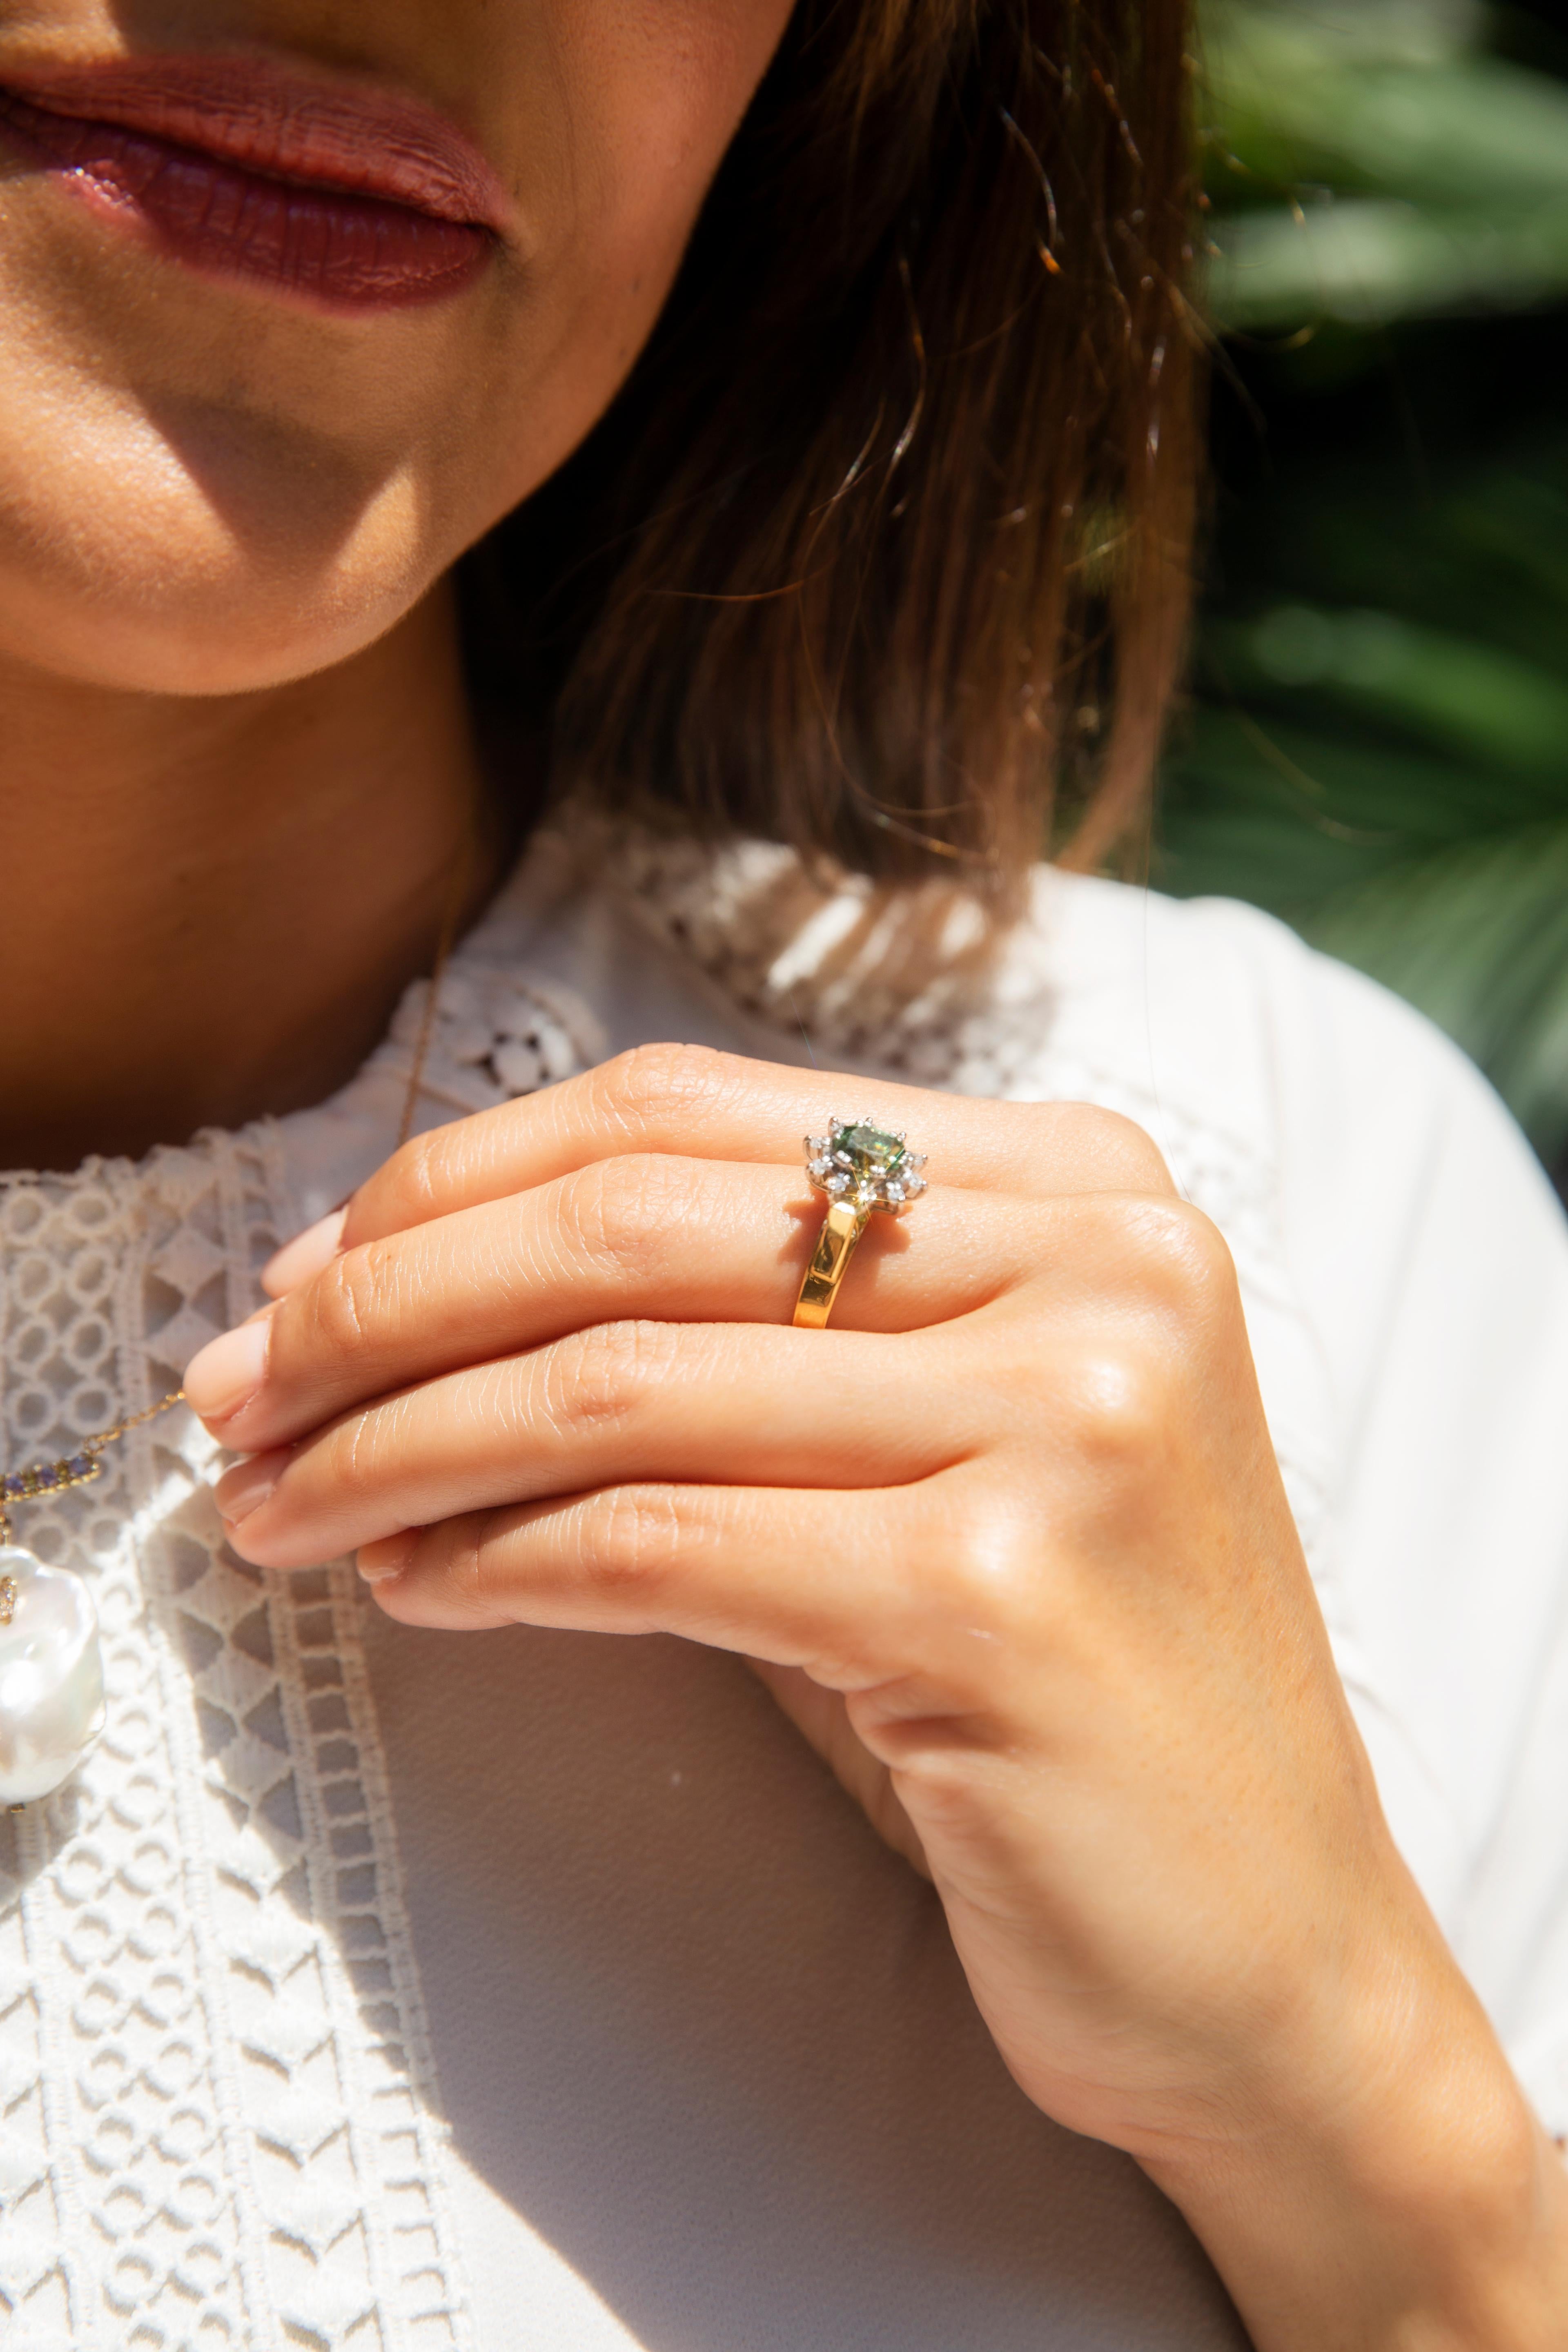 The Charlotte Ring, crafted in 18 carat gold, rises to lift a gorgeous green sapphire allowing the light to dance through and under. She is safe in the embrace of a halo of shimmering diamonds, a vintage delight to be celebrated.

The Charlotte Ring